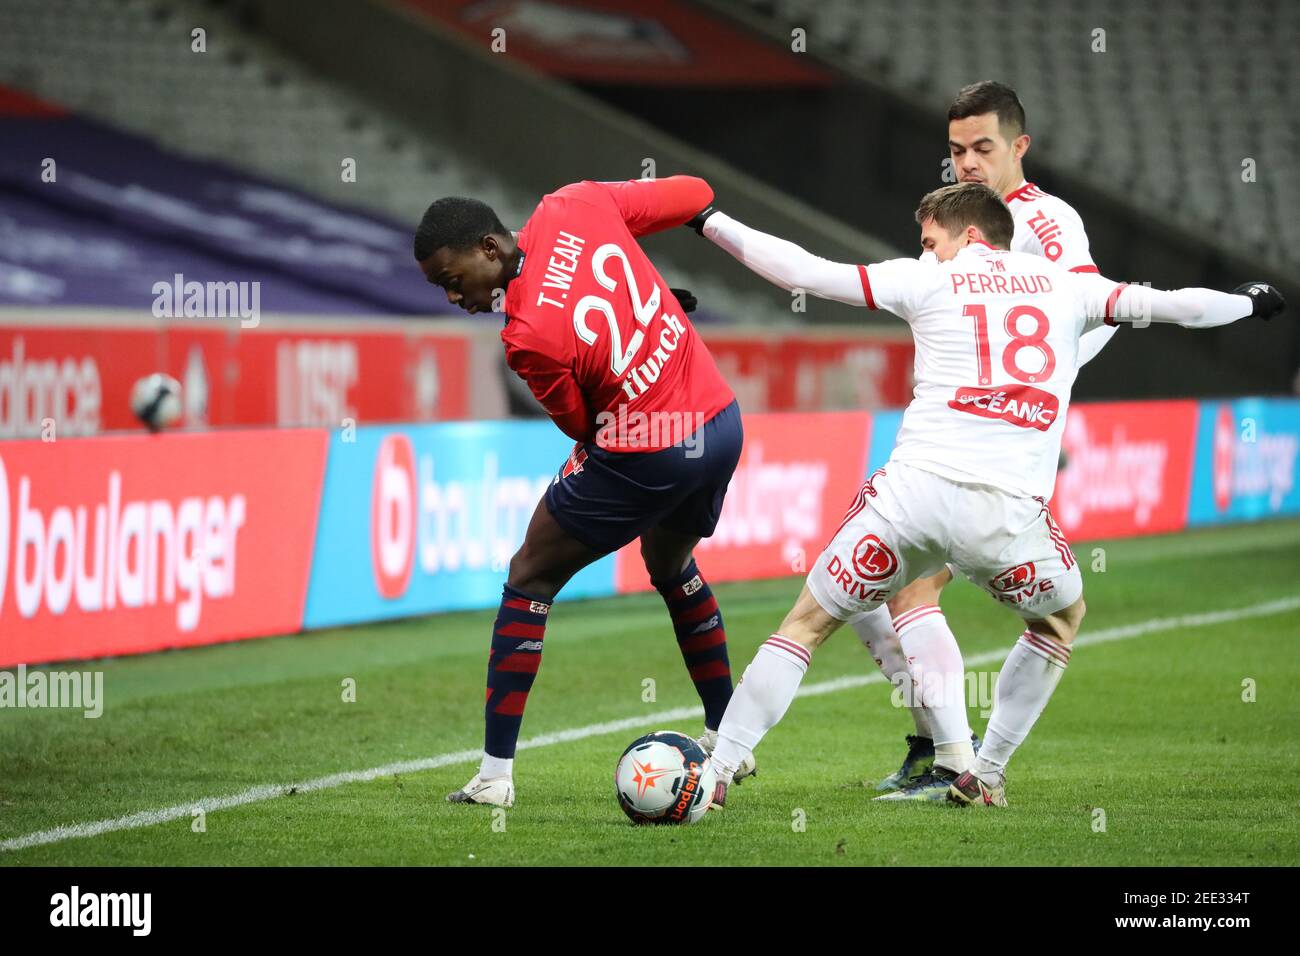 Weah 22 and Perraud 18 Brest during the French championship Ligue 1 football  match between Lille OSC and Stade Brestois 29 on / LM Stock Photo - Alamy